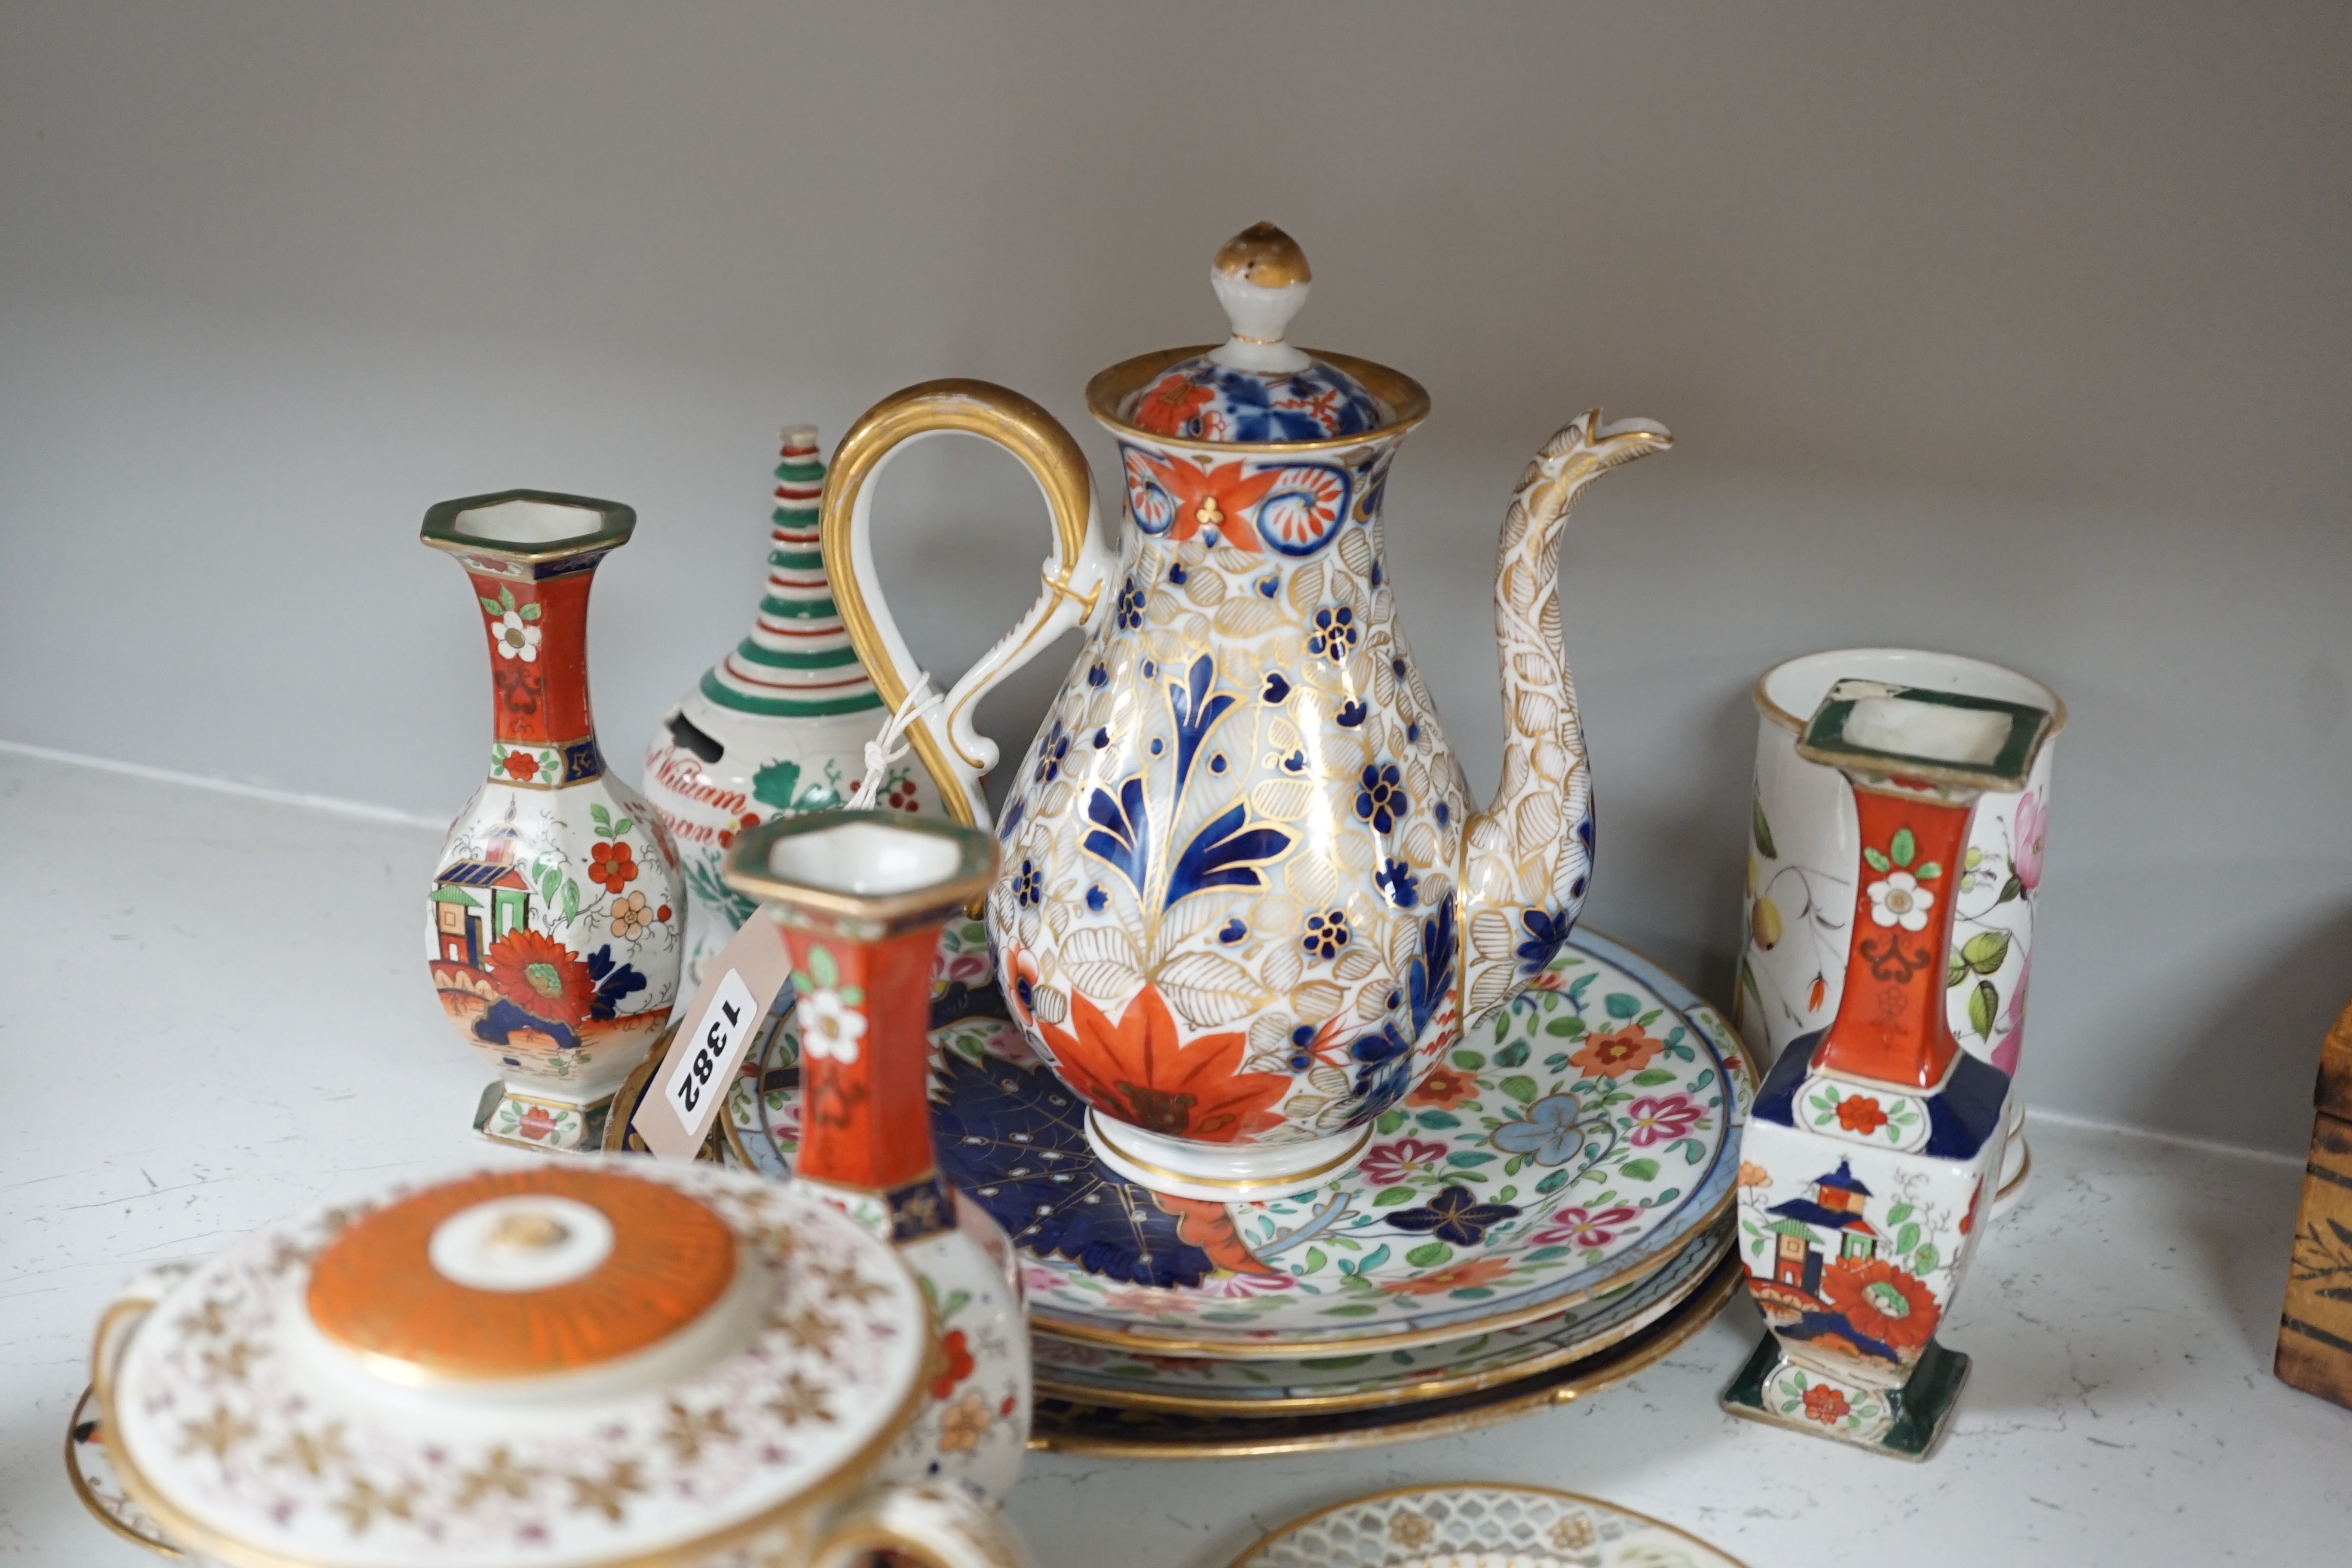 A selection of English porcelain and ceramics, to include a two handled Wedgwood Queensware urn, cover and stand, c.1800, two 19th century Worcester pierced bordered dishes, etc.